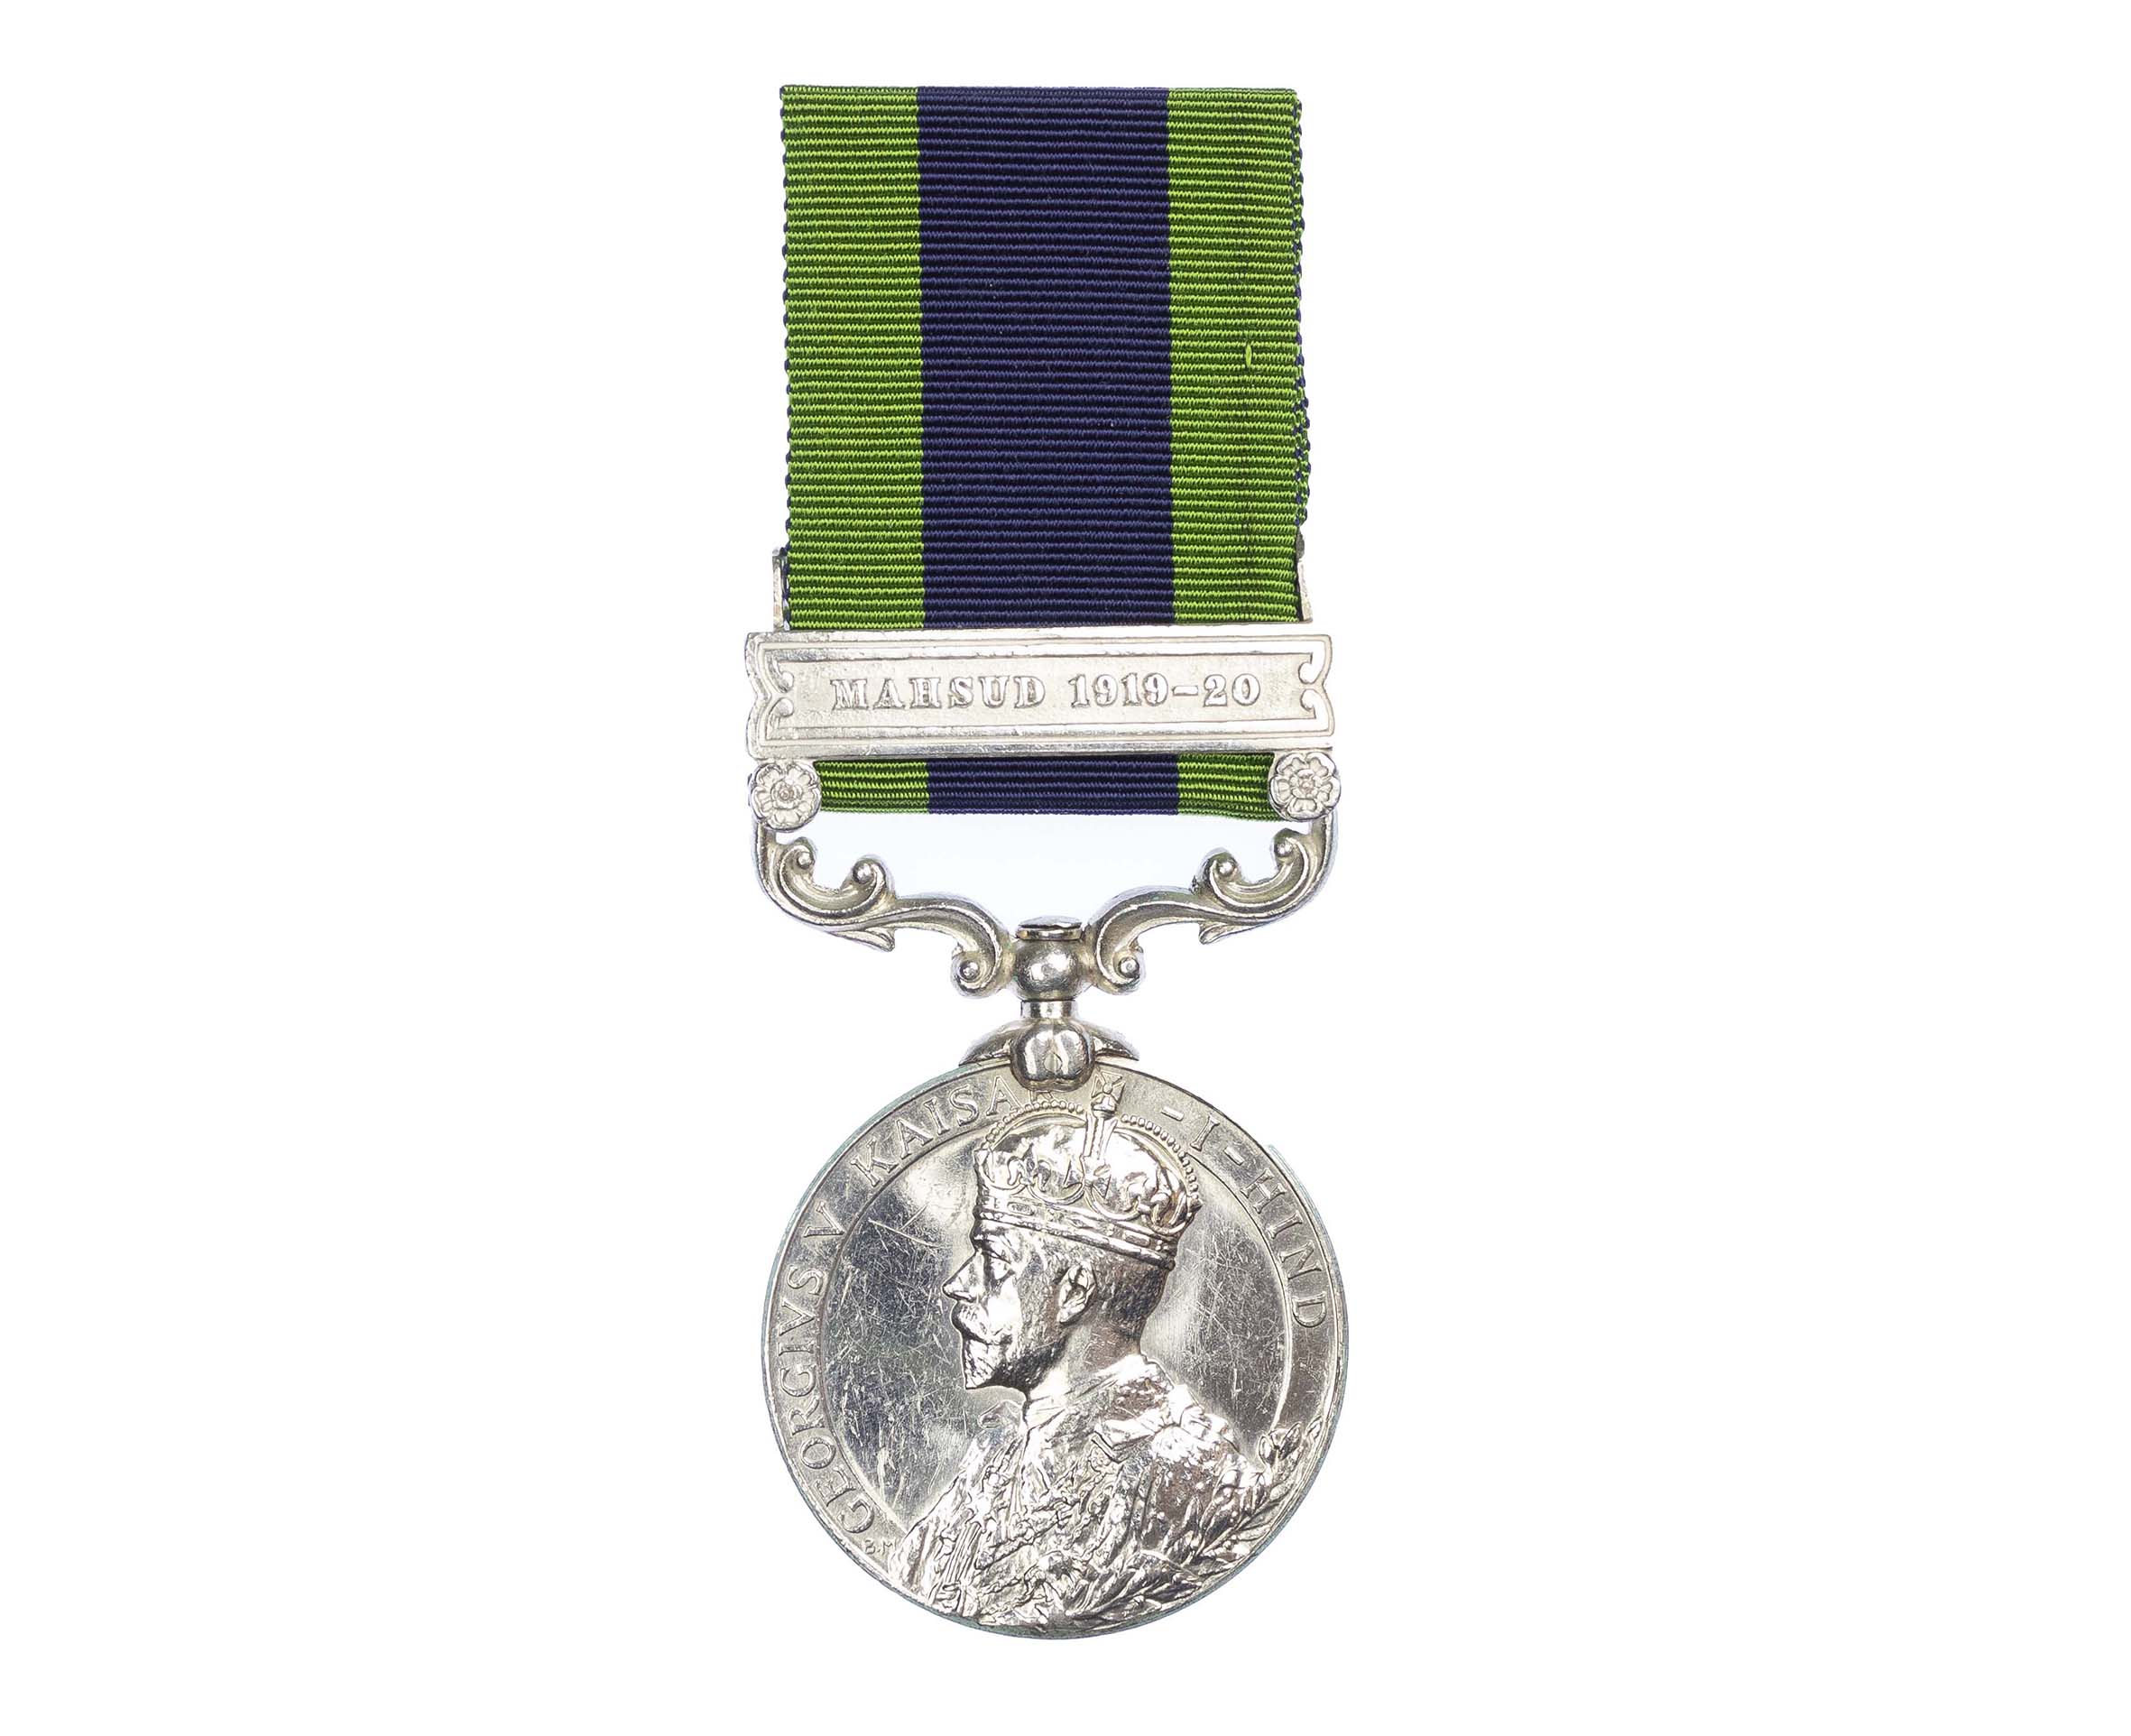 India General Service Medal 1908-1935, GVR, one clasp Mahsud 1919-20, to Jemadar Suleman Khan